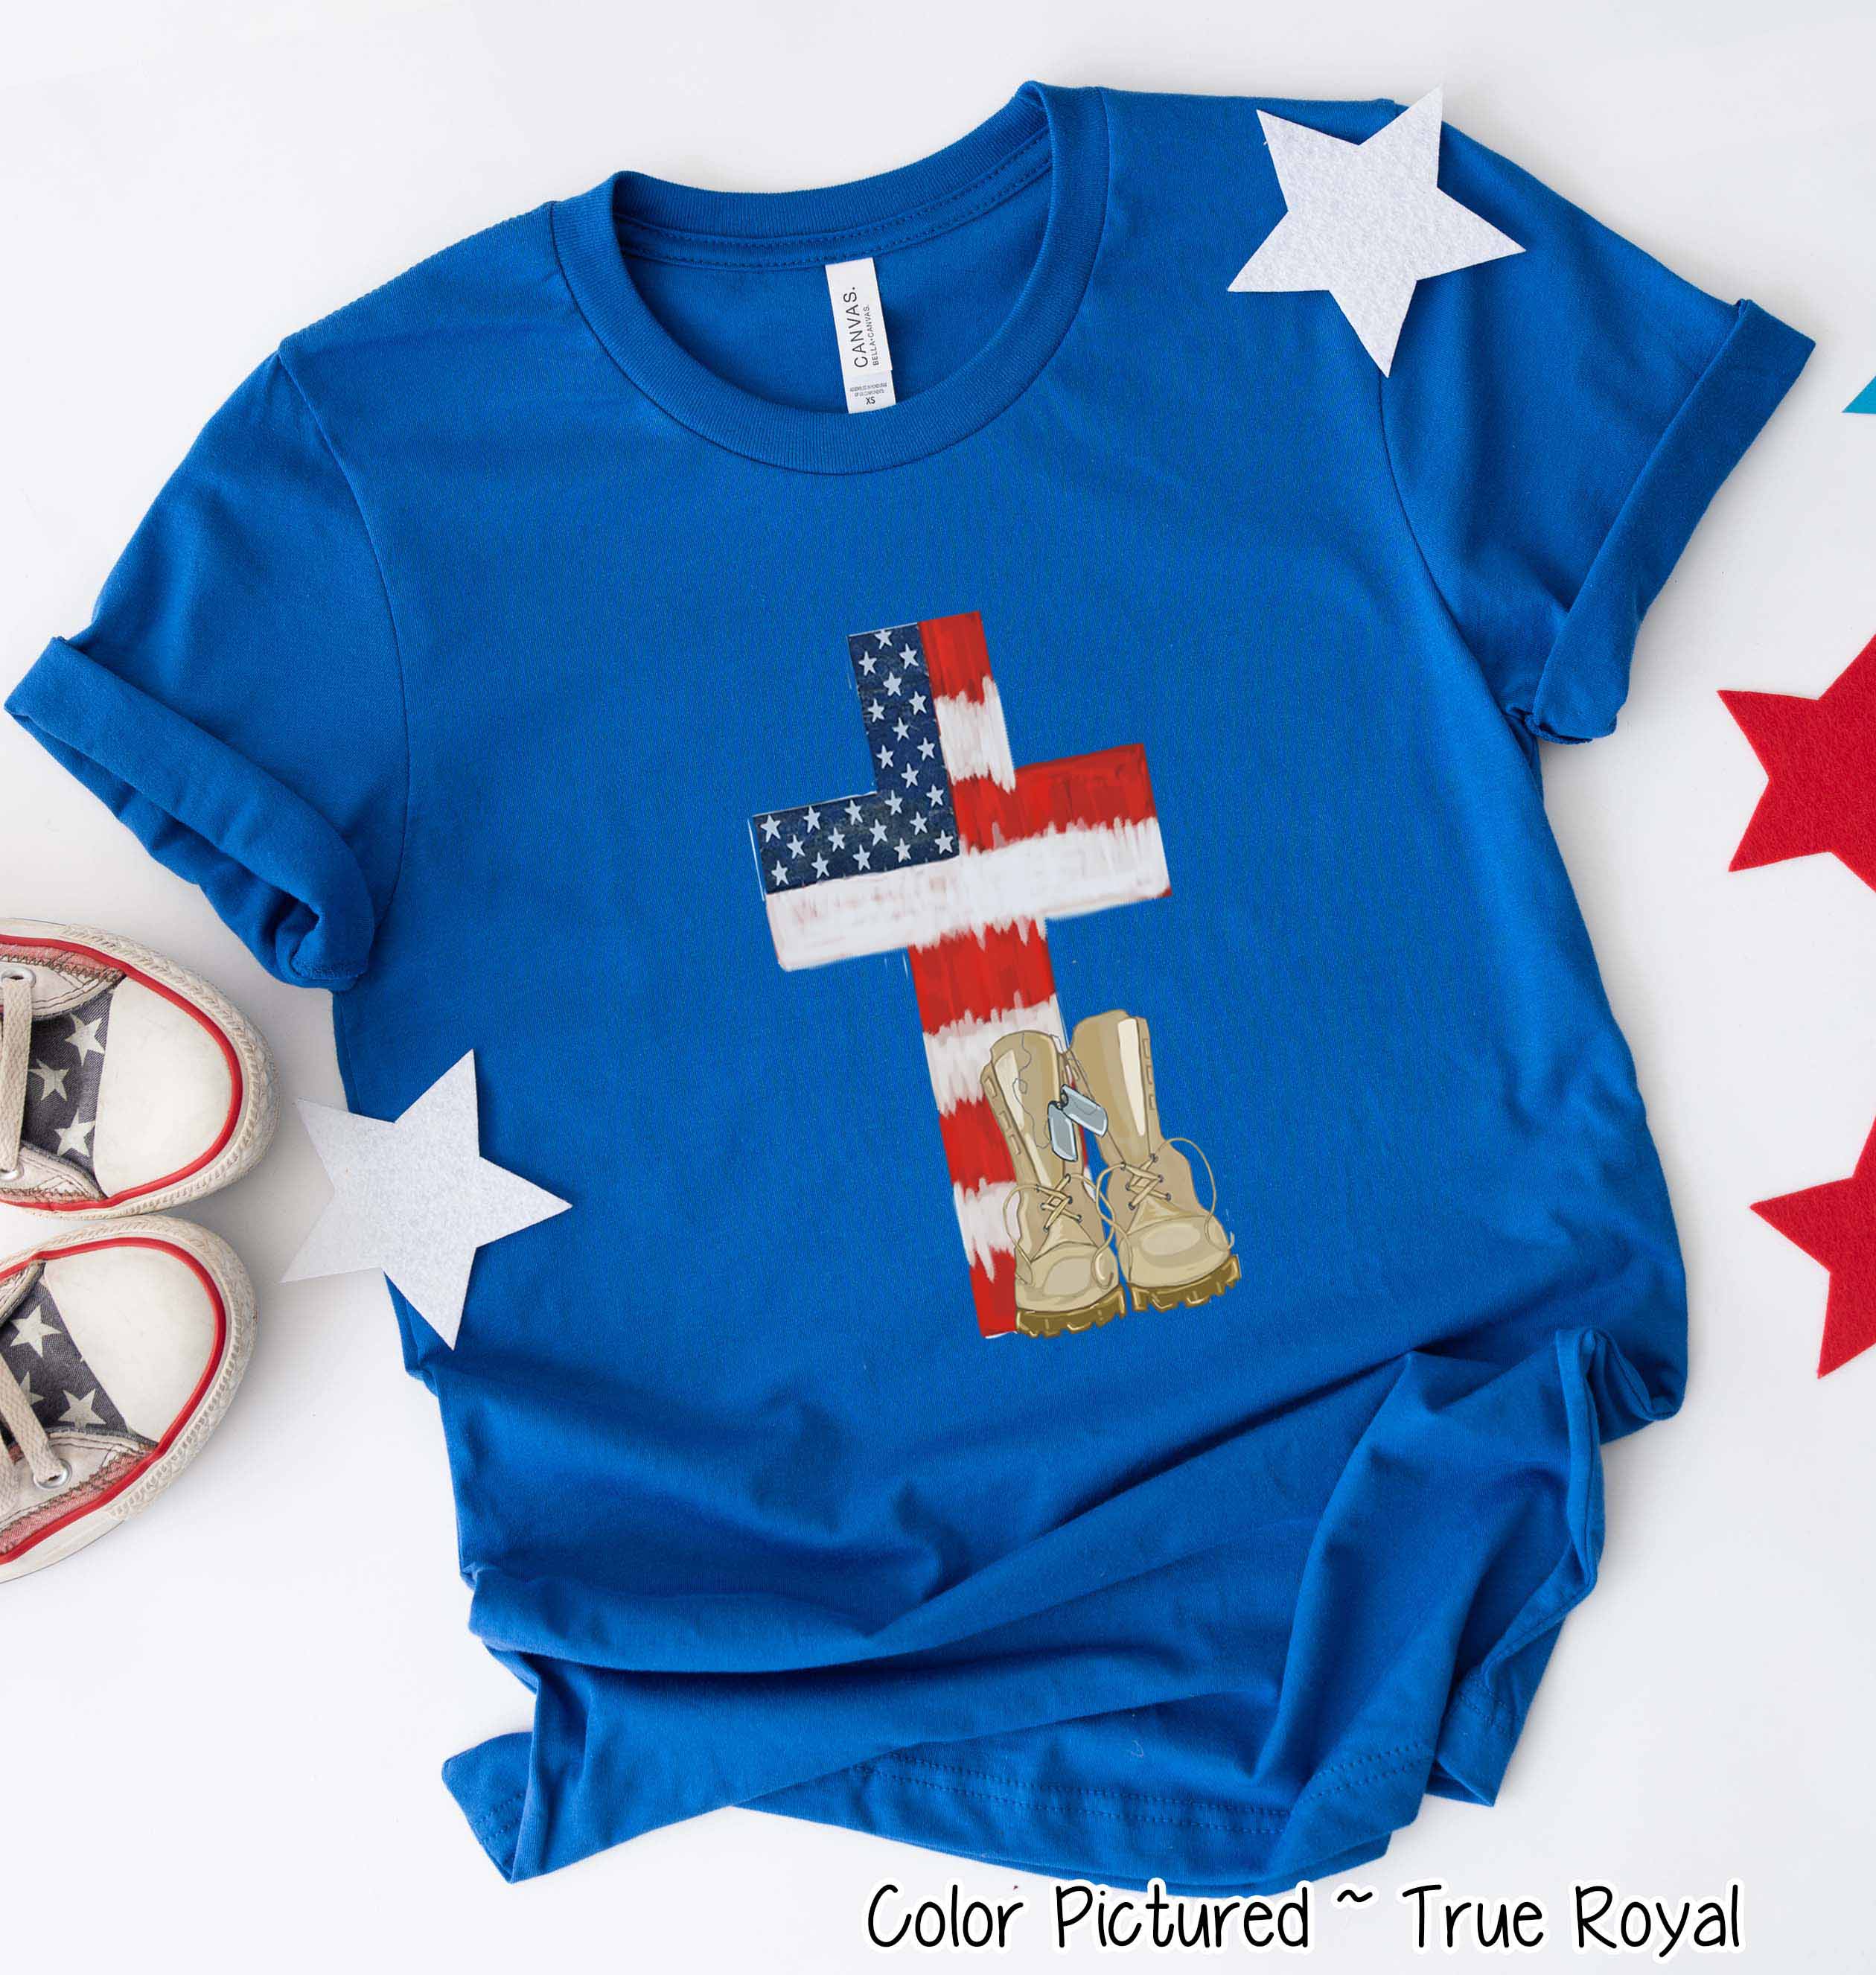 Watercolor American Flag Cross Tee with Military Boots